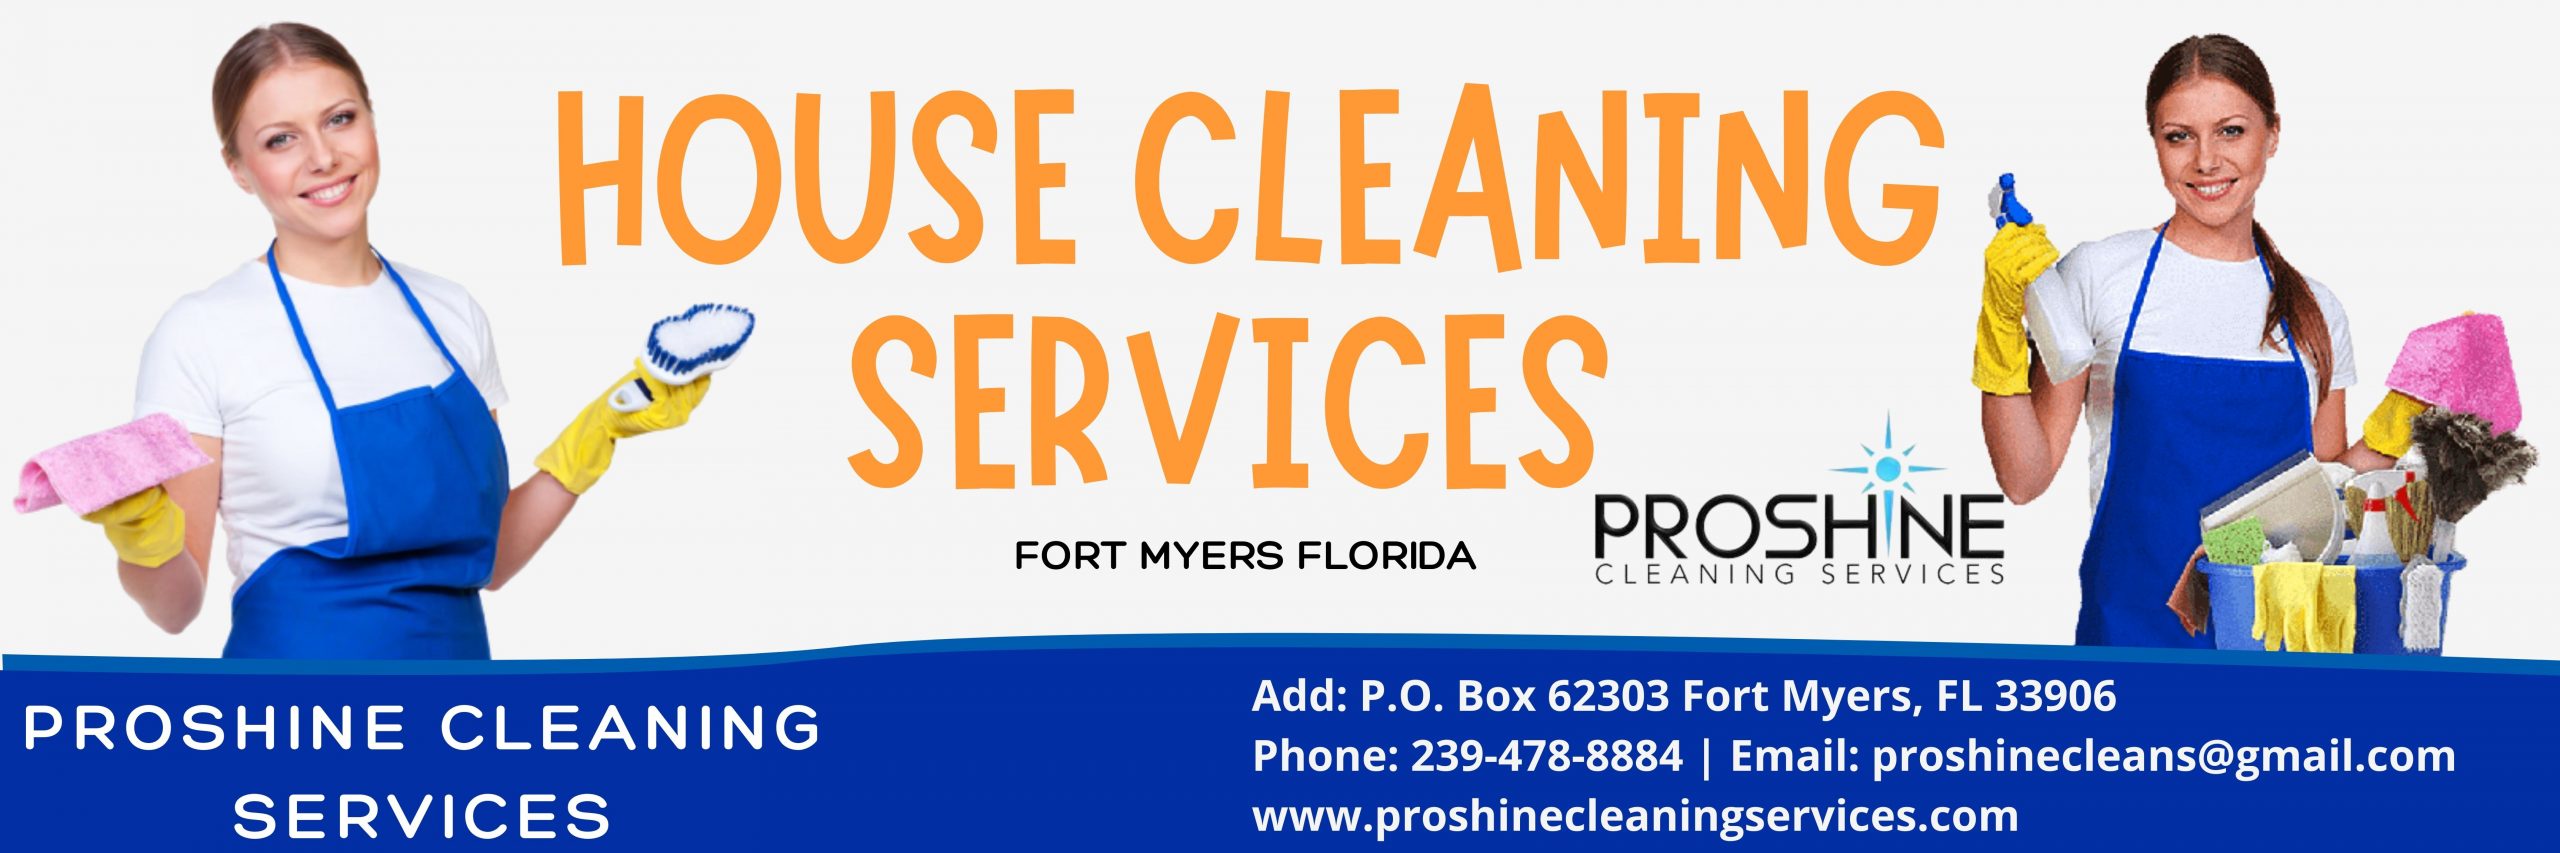 Ft. Myers House cleaning services